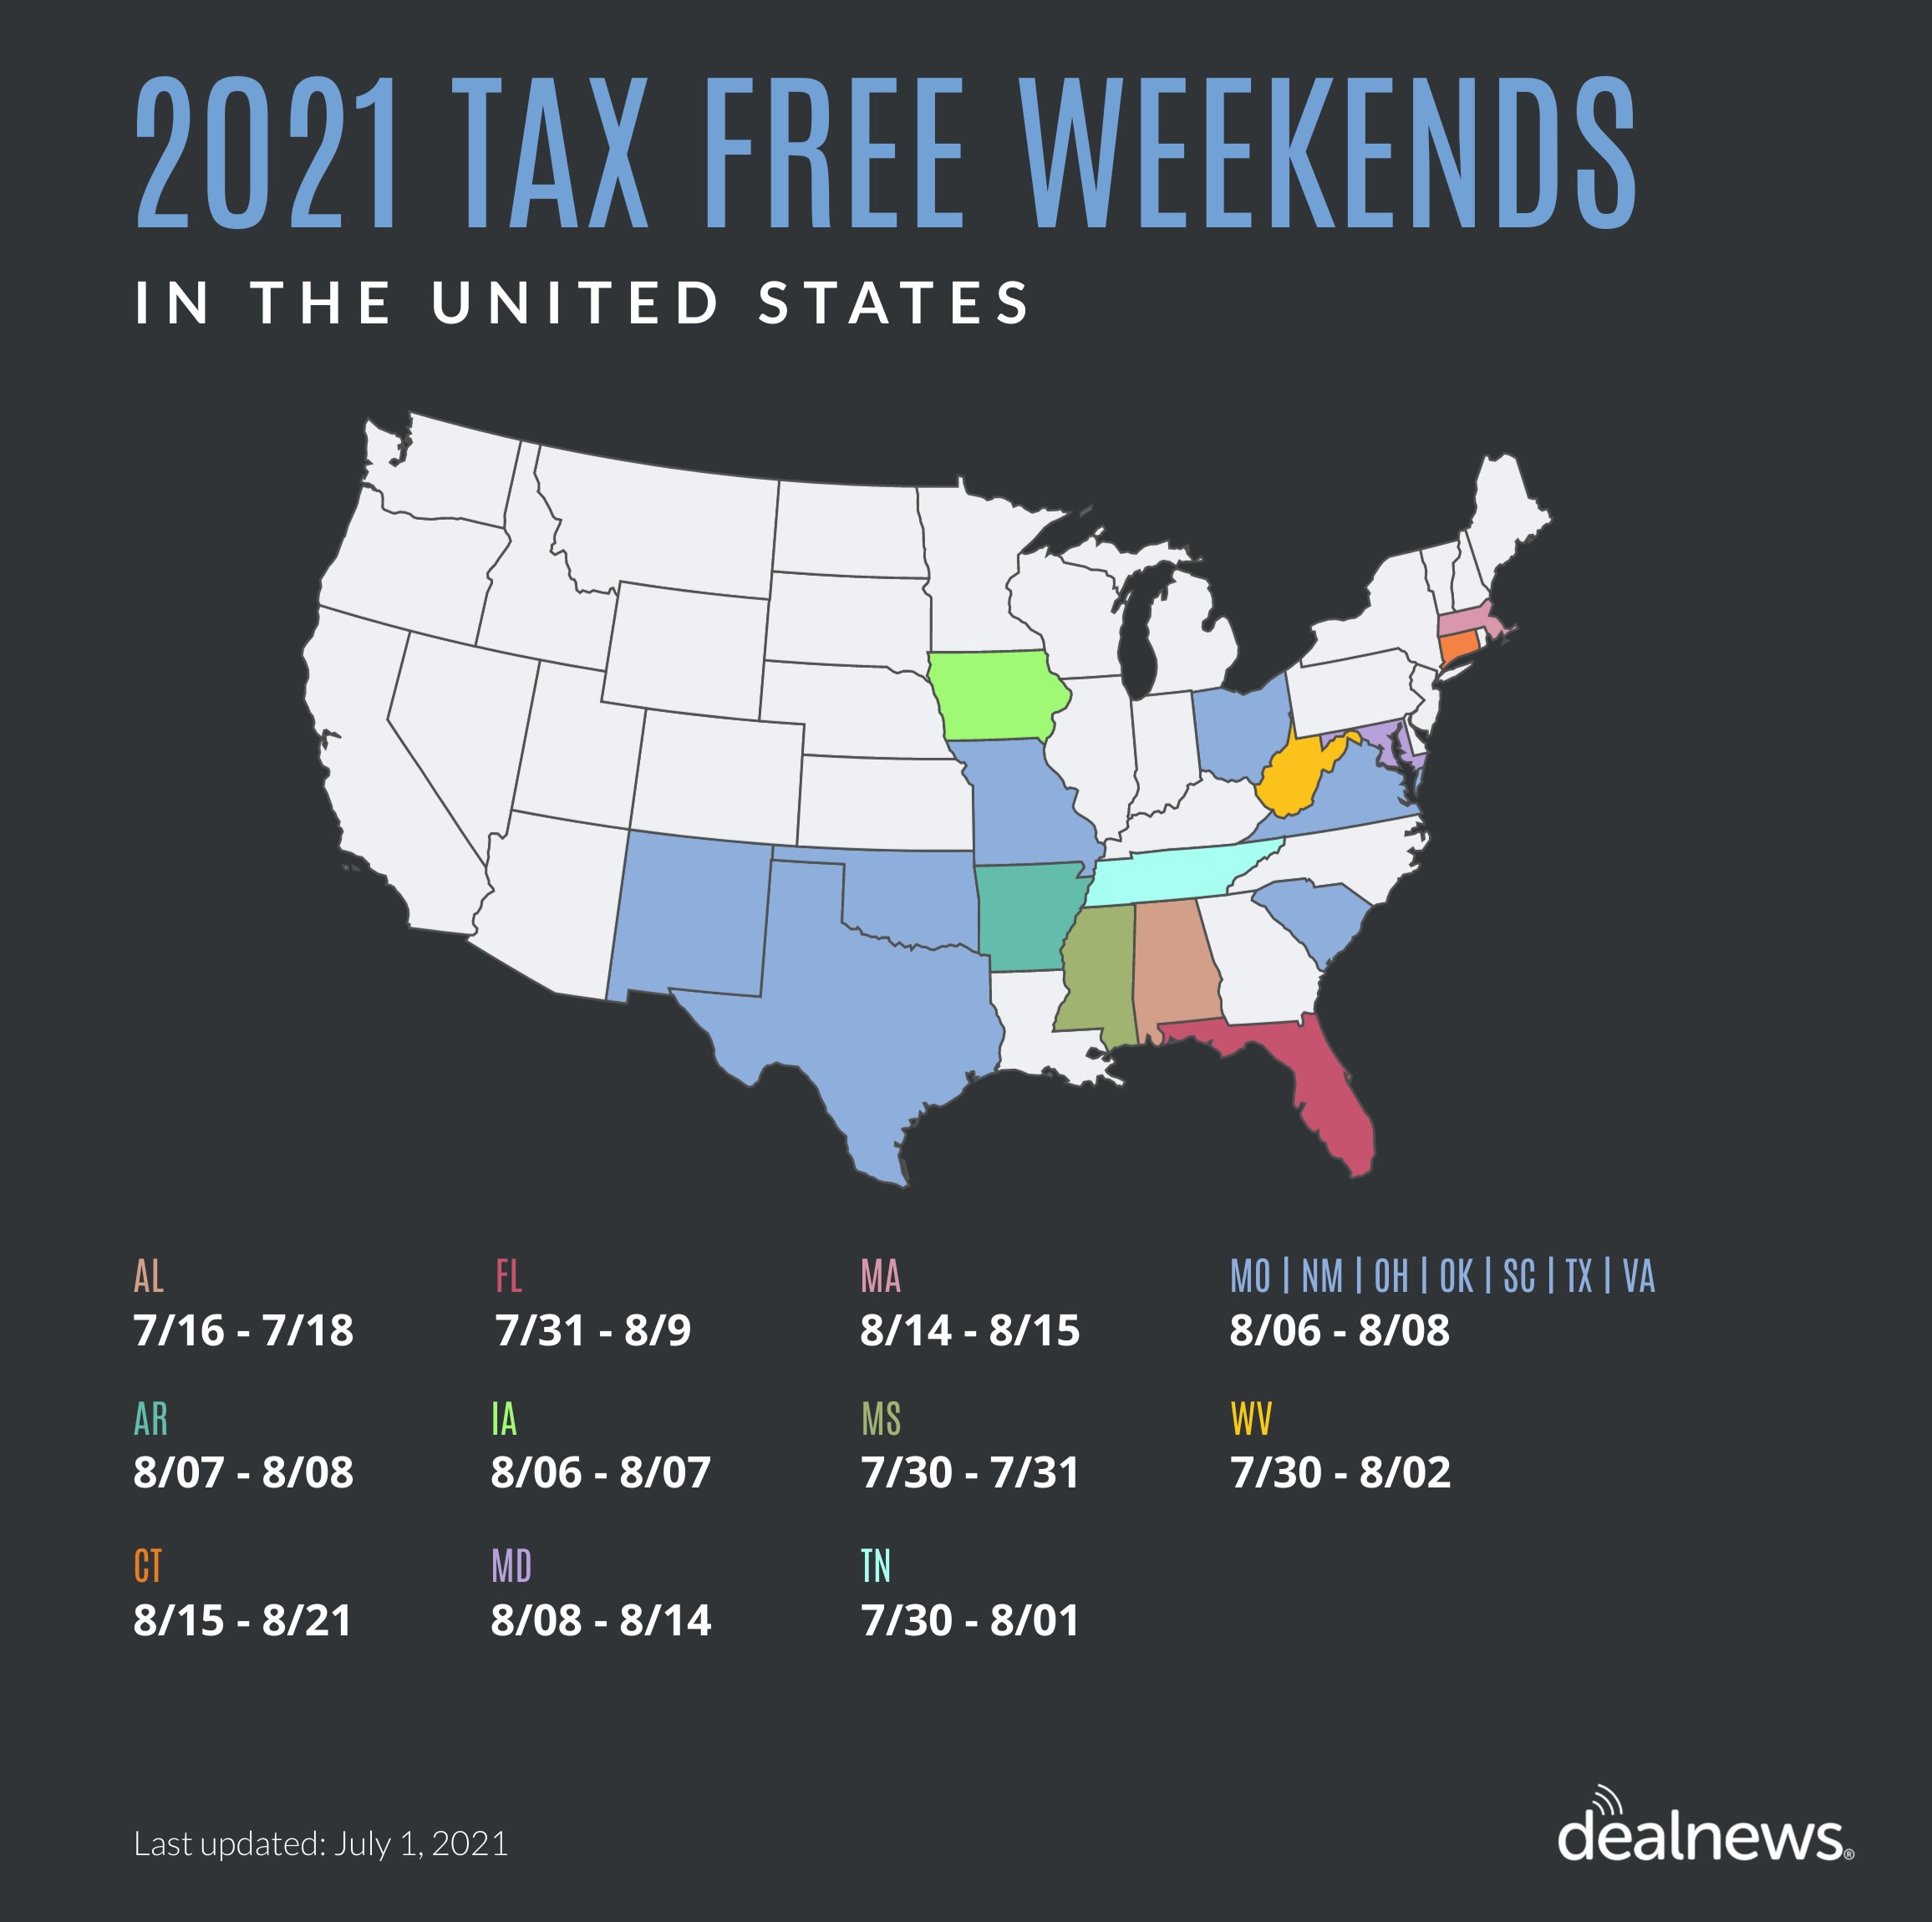 When Is Your State's Tax Free Weekend in 2021?